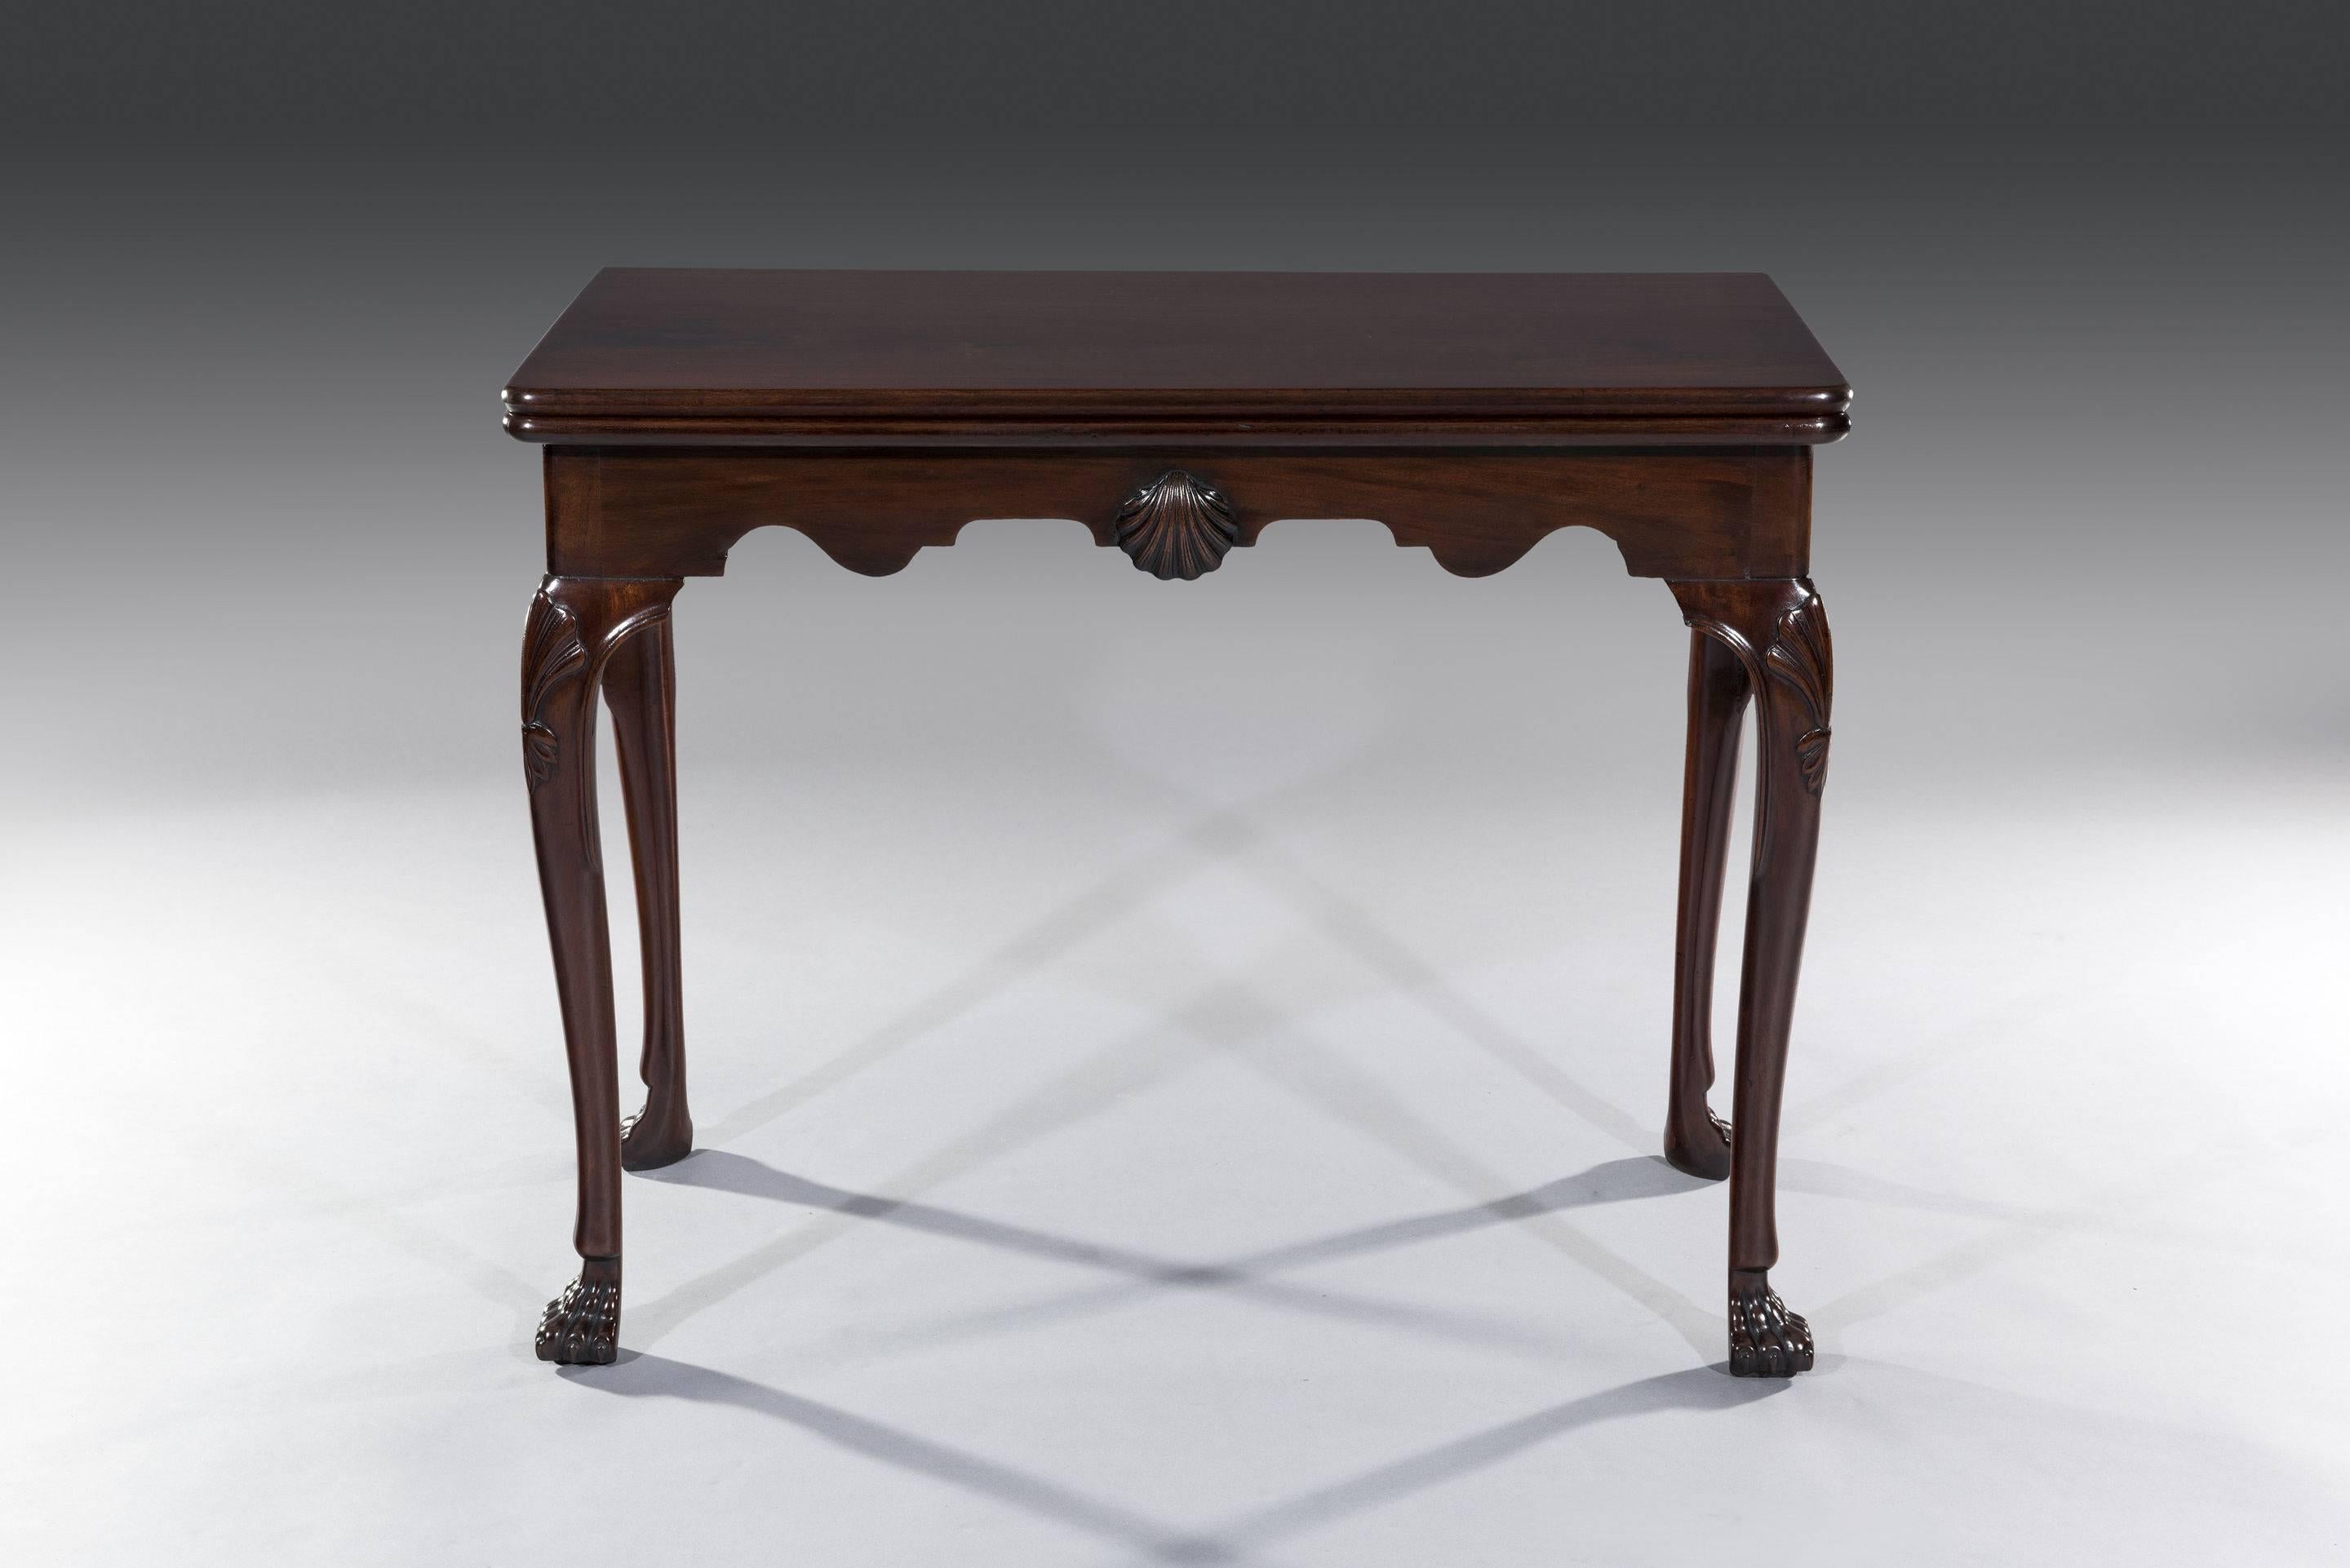 The solid Cuban mahogany rectangular top has a figured grain and retains a deep color and patination. The top lifts up to reveal a green baize playing surface which is supported by a single gate-leg action leg at the back. The frieze is shaped and